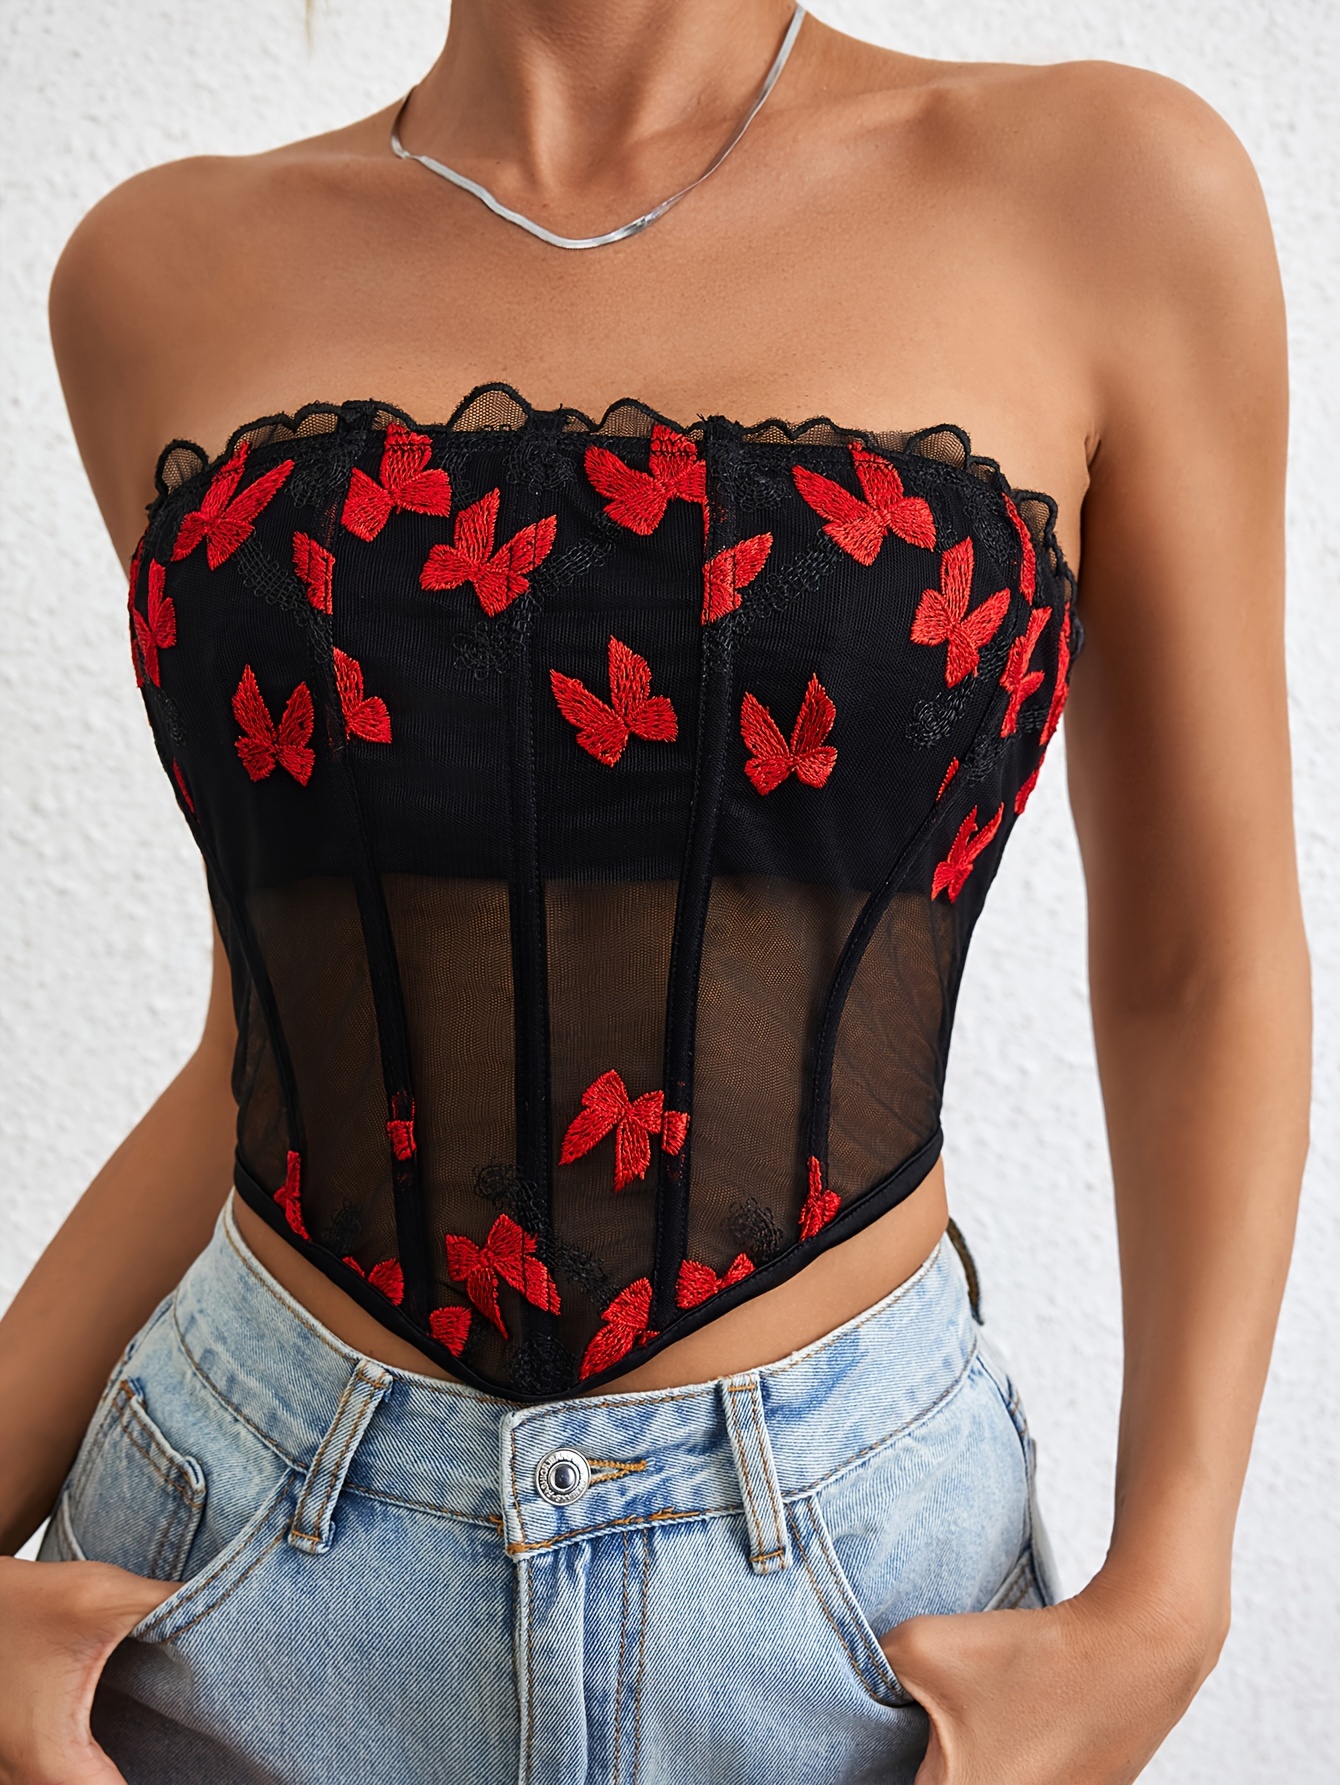 Butterfly Embroidered Slim Mesh Tube Top, Elegant Backless Sleeveless  Bustier Tube Top For Every Day, Women's Clothing For Coquette/Cute/Y2K Style